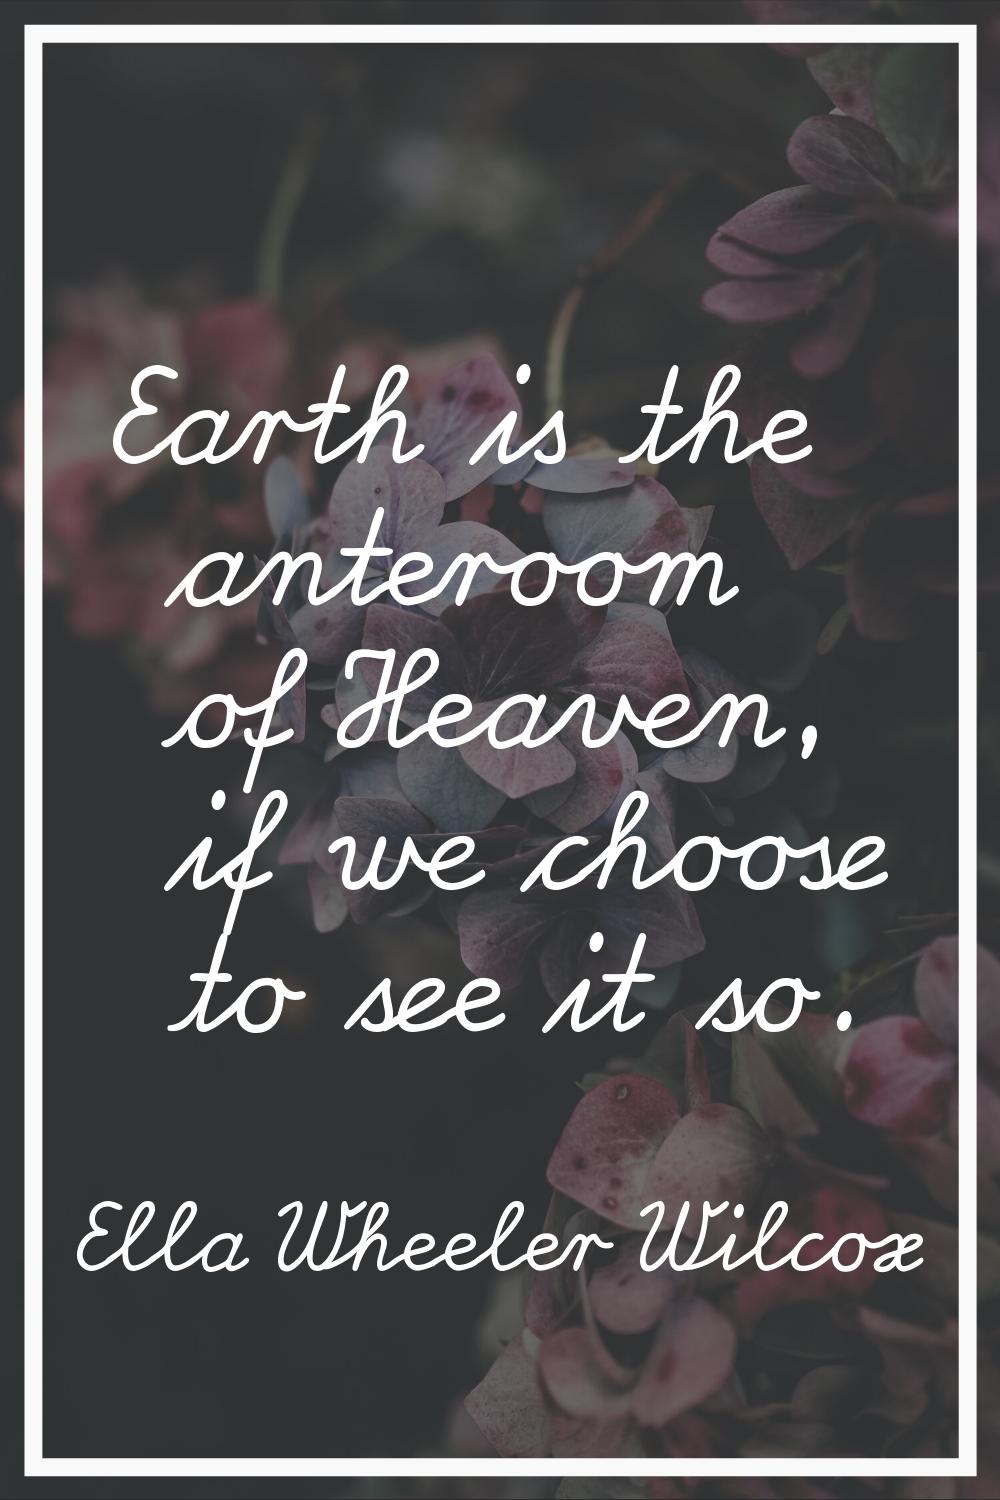 Earth is the anteroom of Heaven, if we choose to see it so.